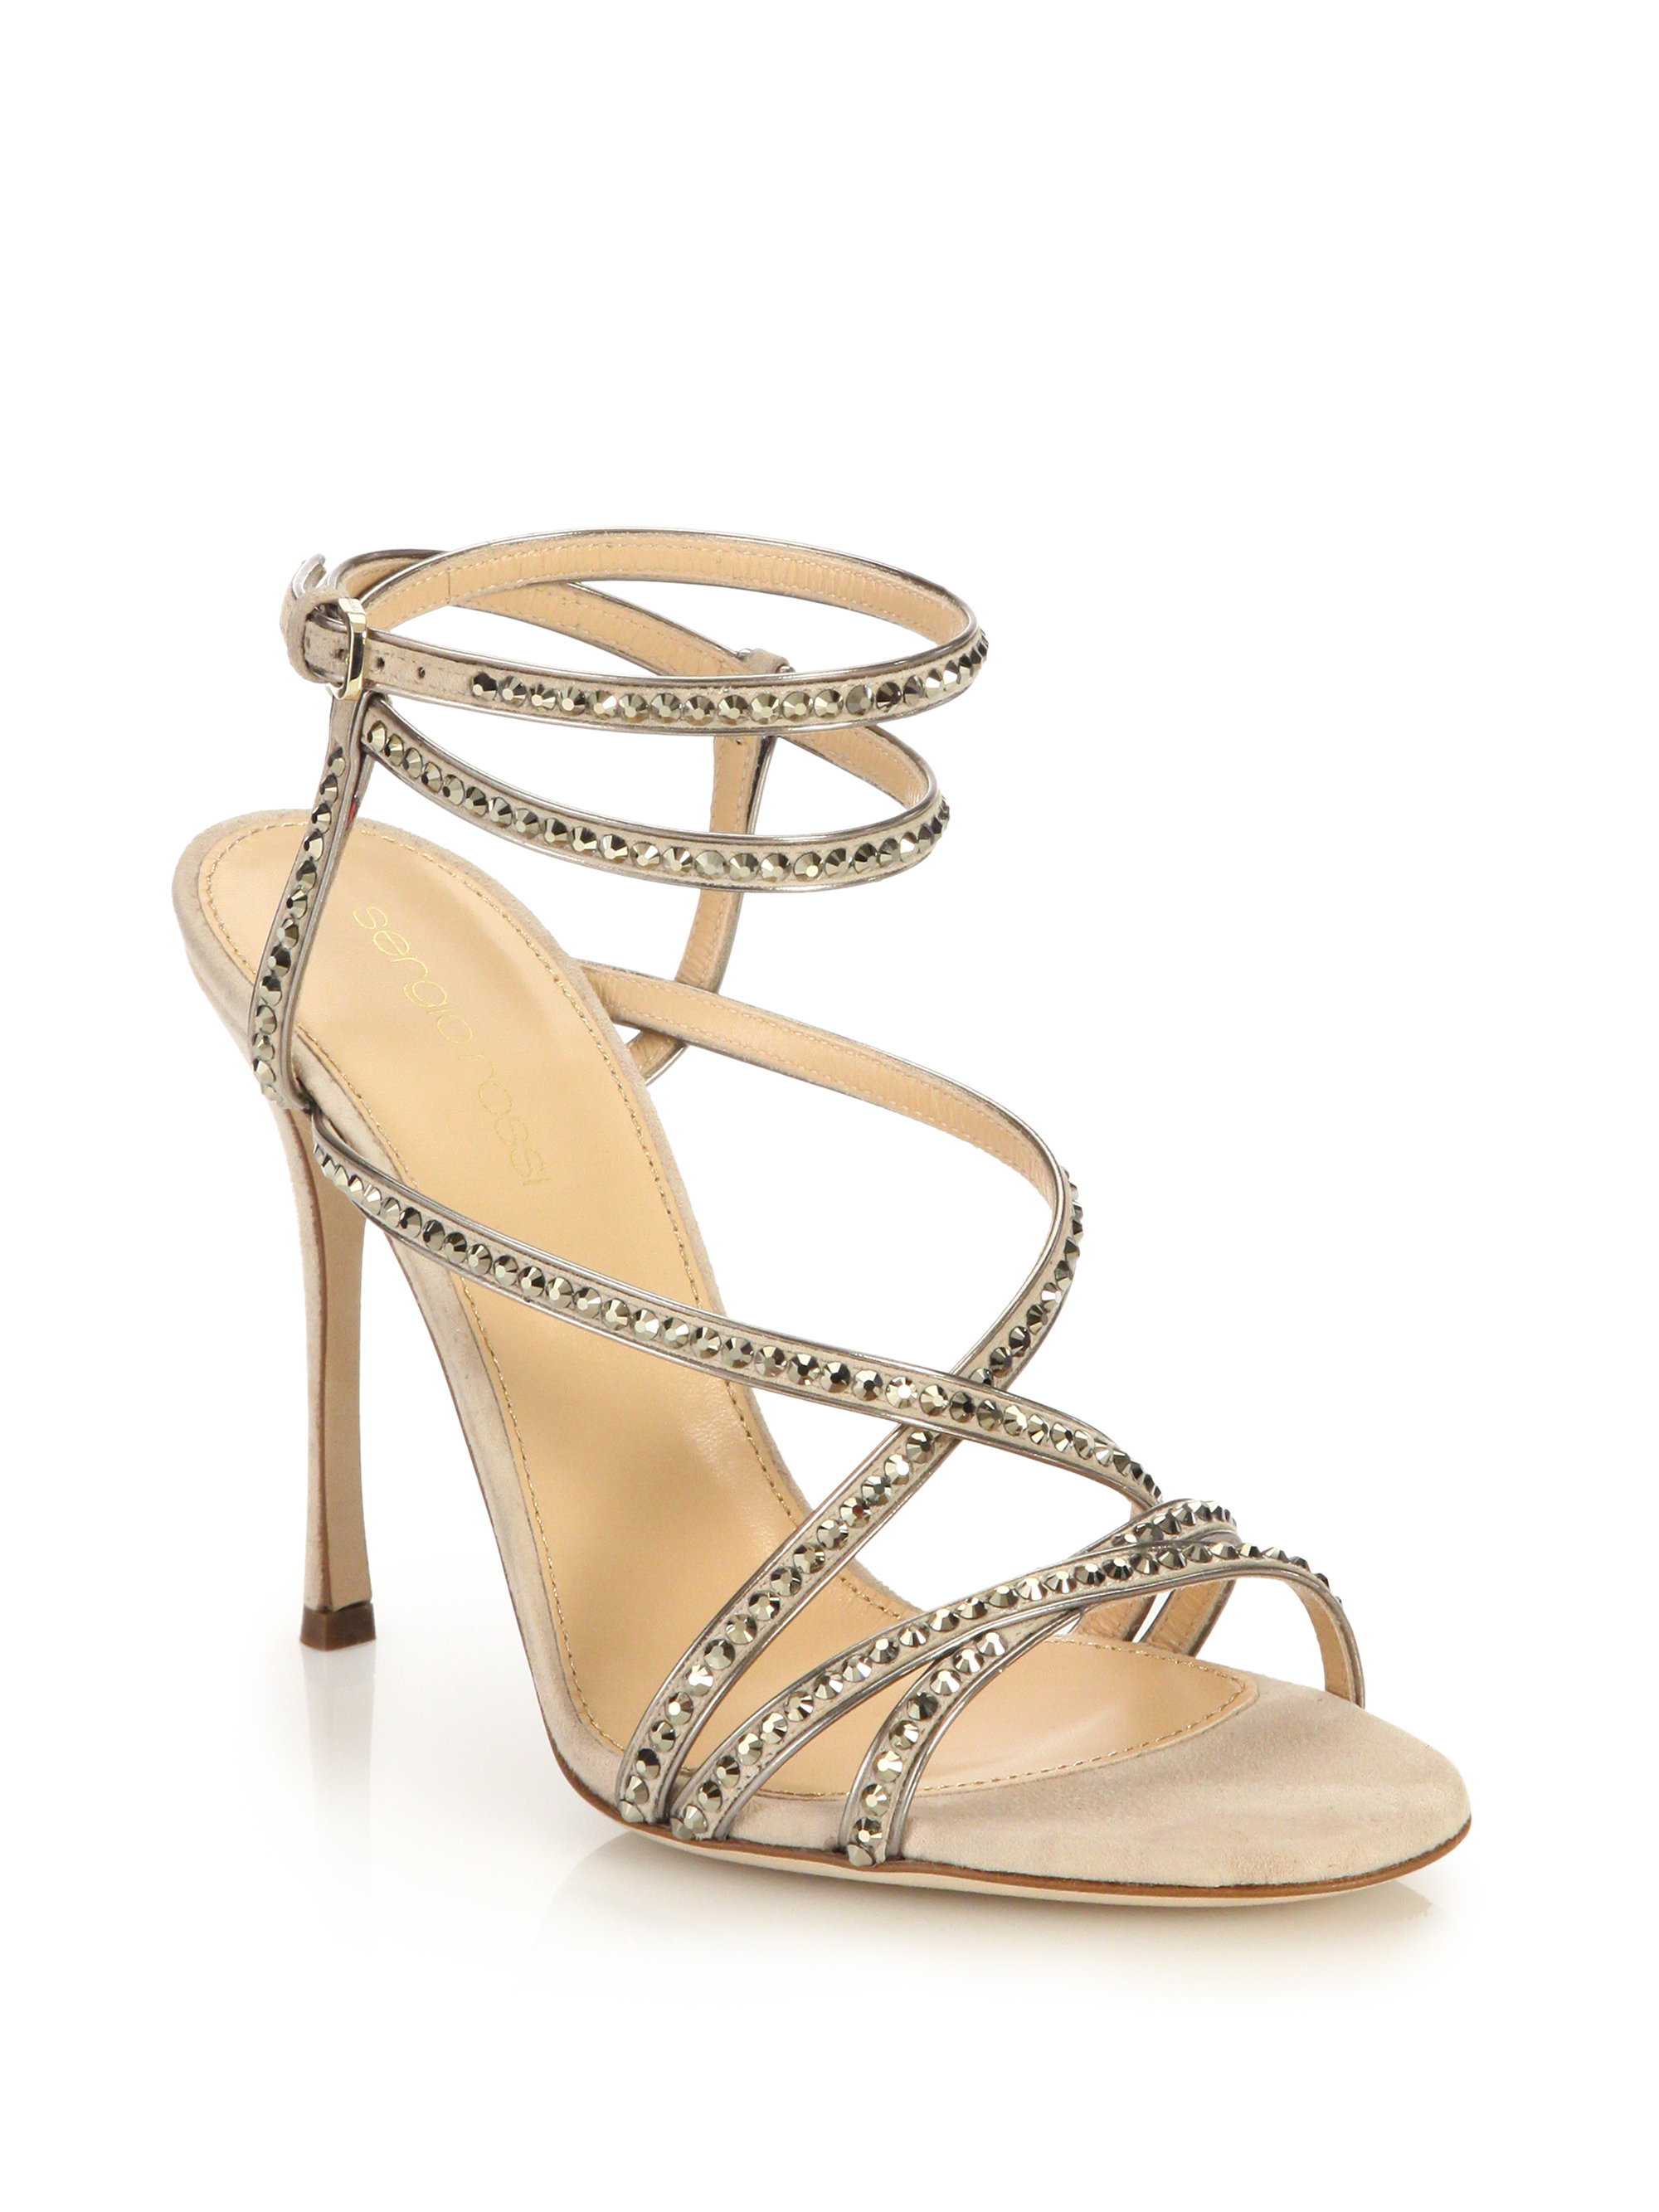 Lyst - Sergio rossi Bejeweled Suede Sandals in Natural